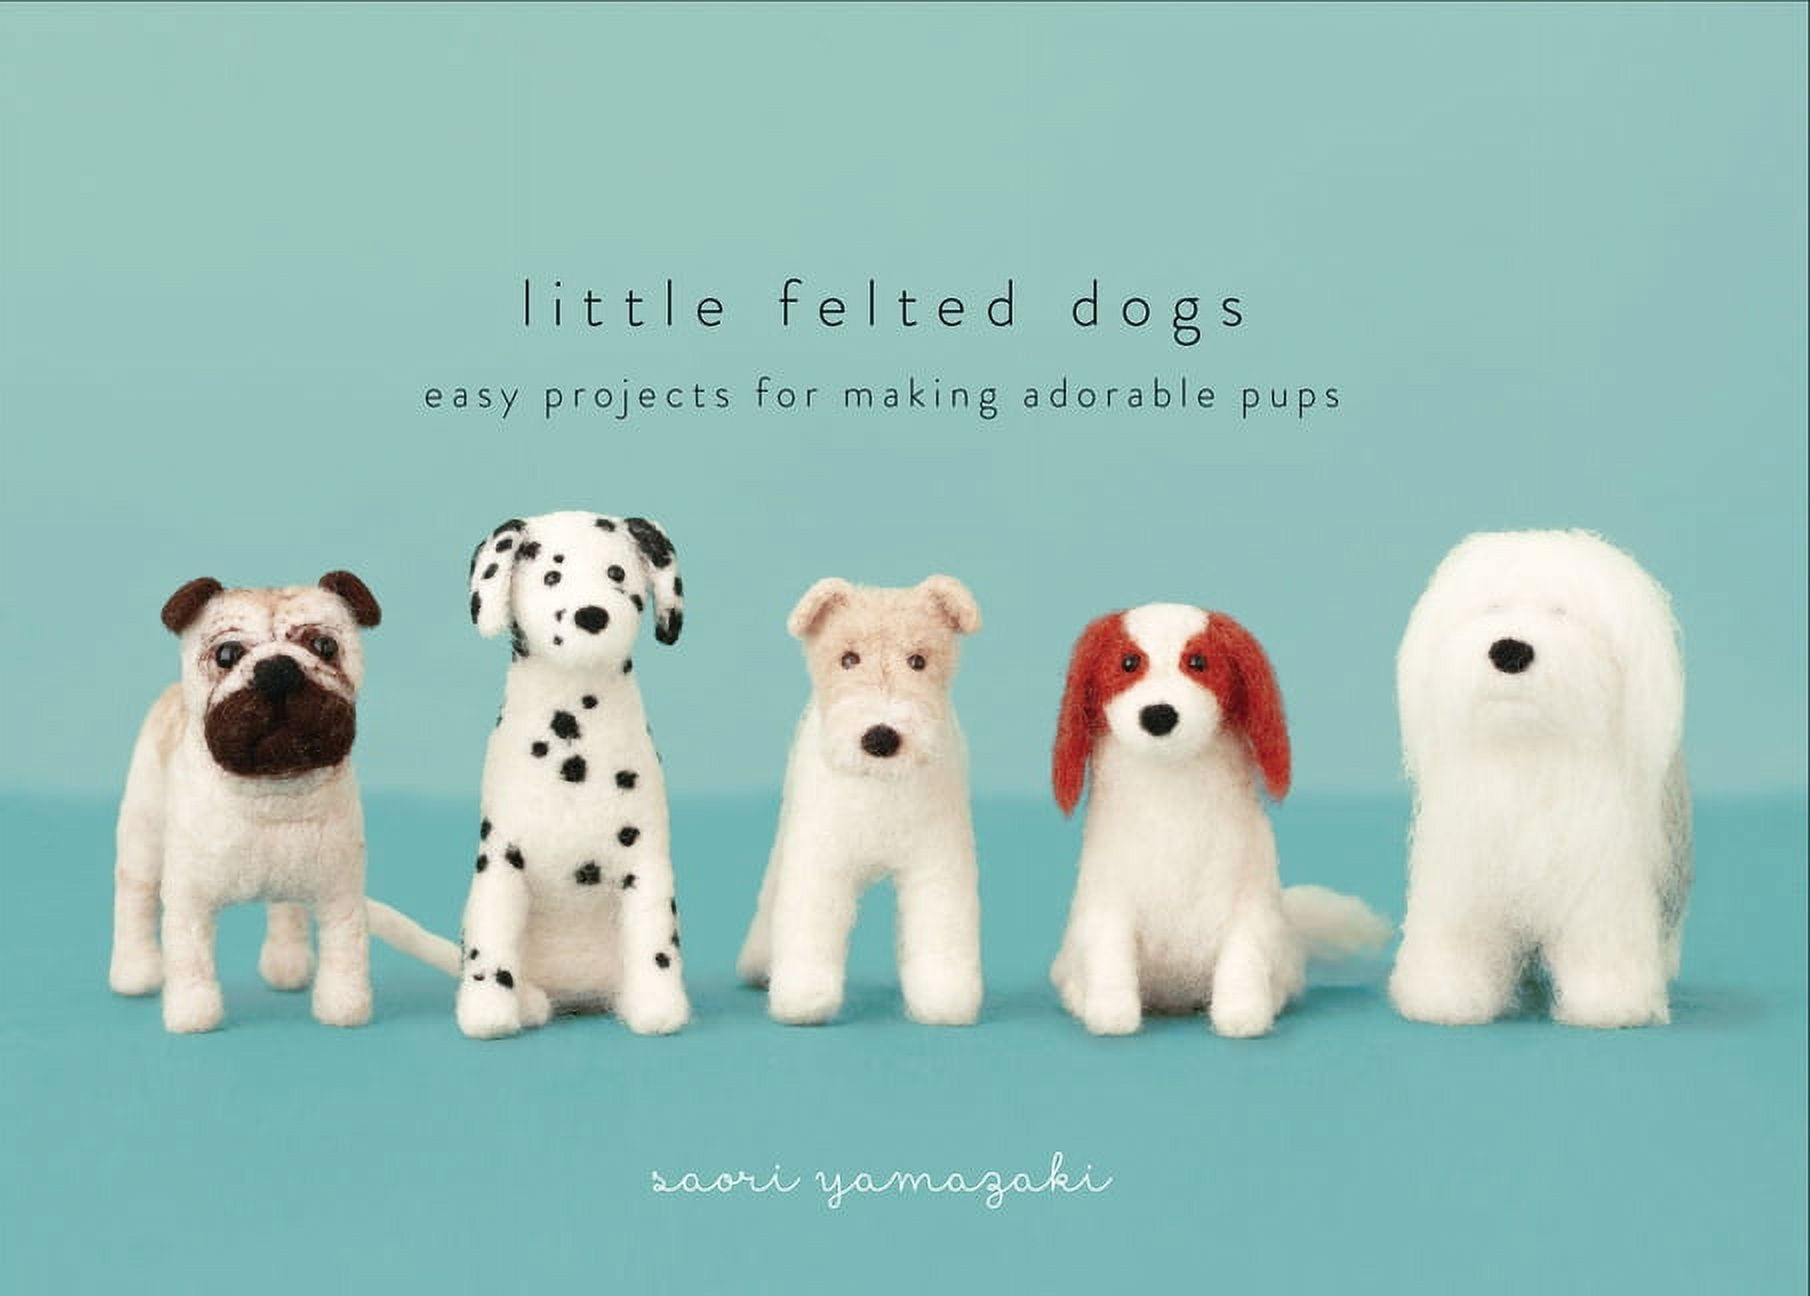 Whimsical Dog Needle Felting Kit for Beginners. Make Your Very Own  Whimsical Character From Our Whimsicals Range. 